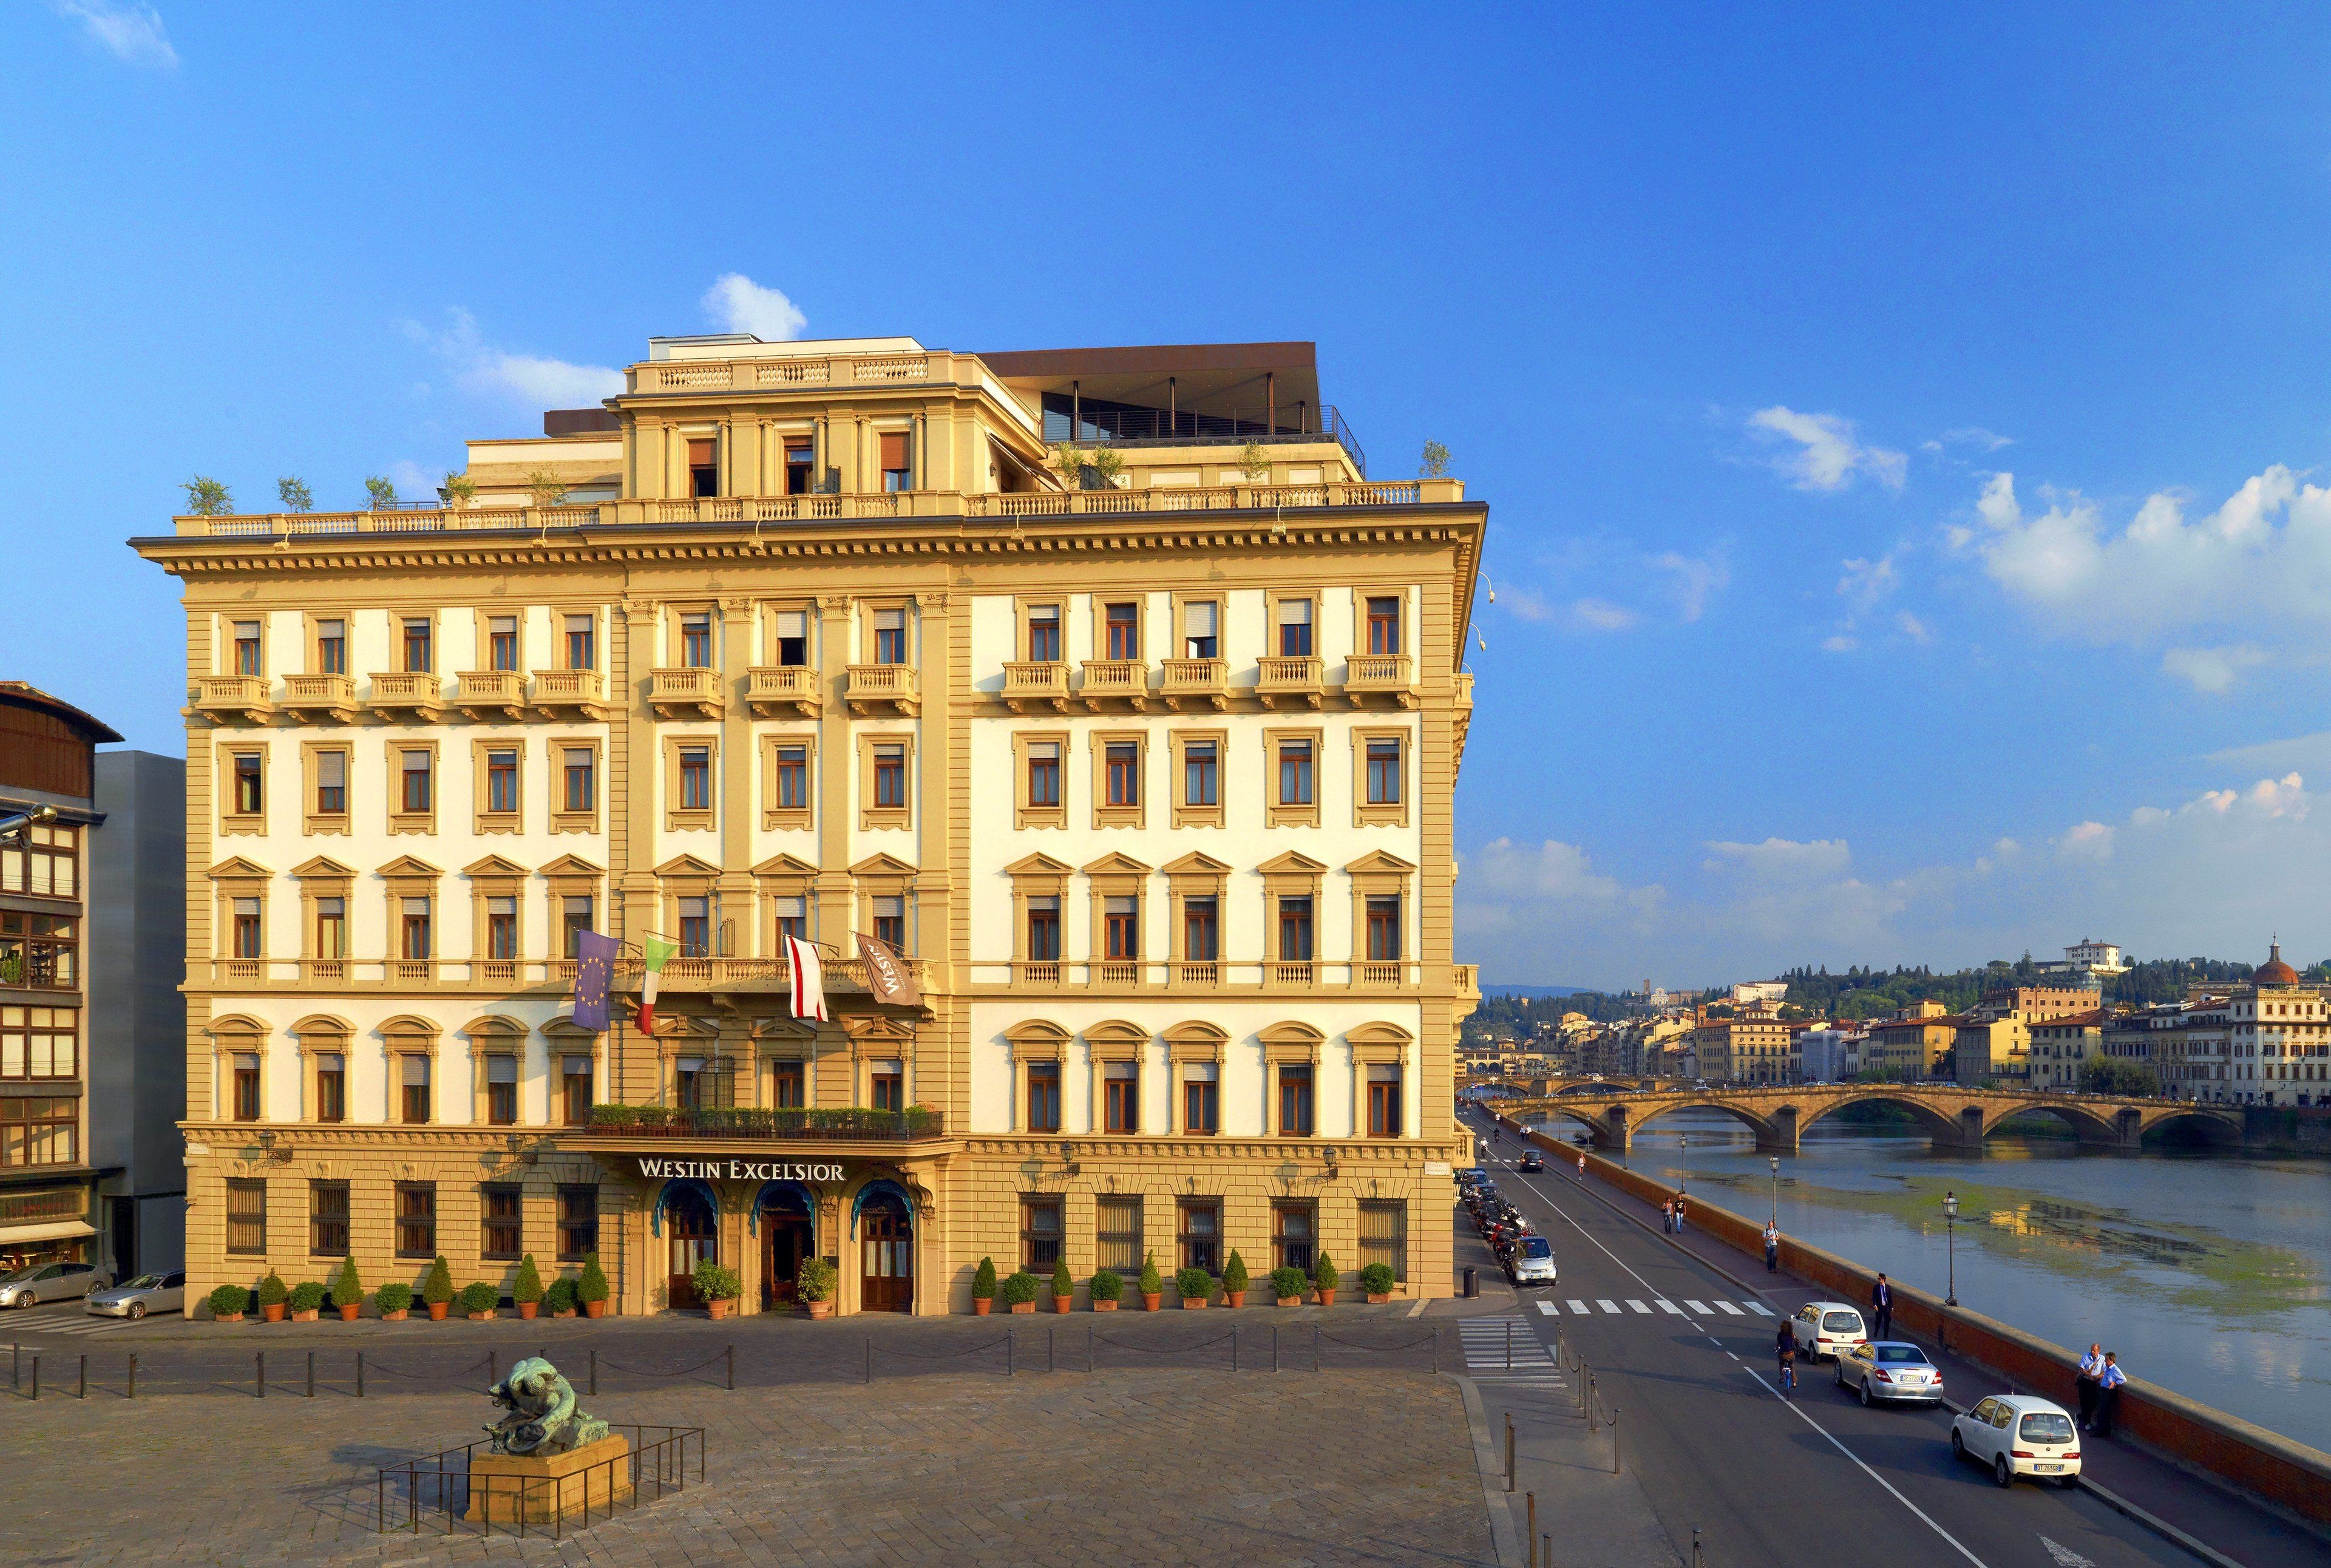 The Westin Excelsior Florence image 1